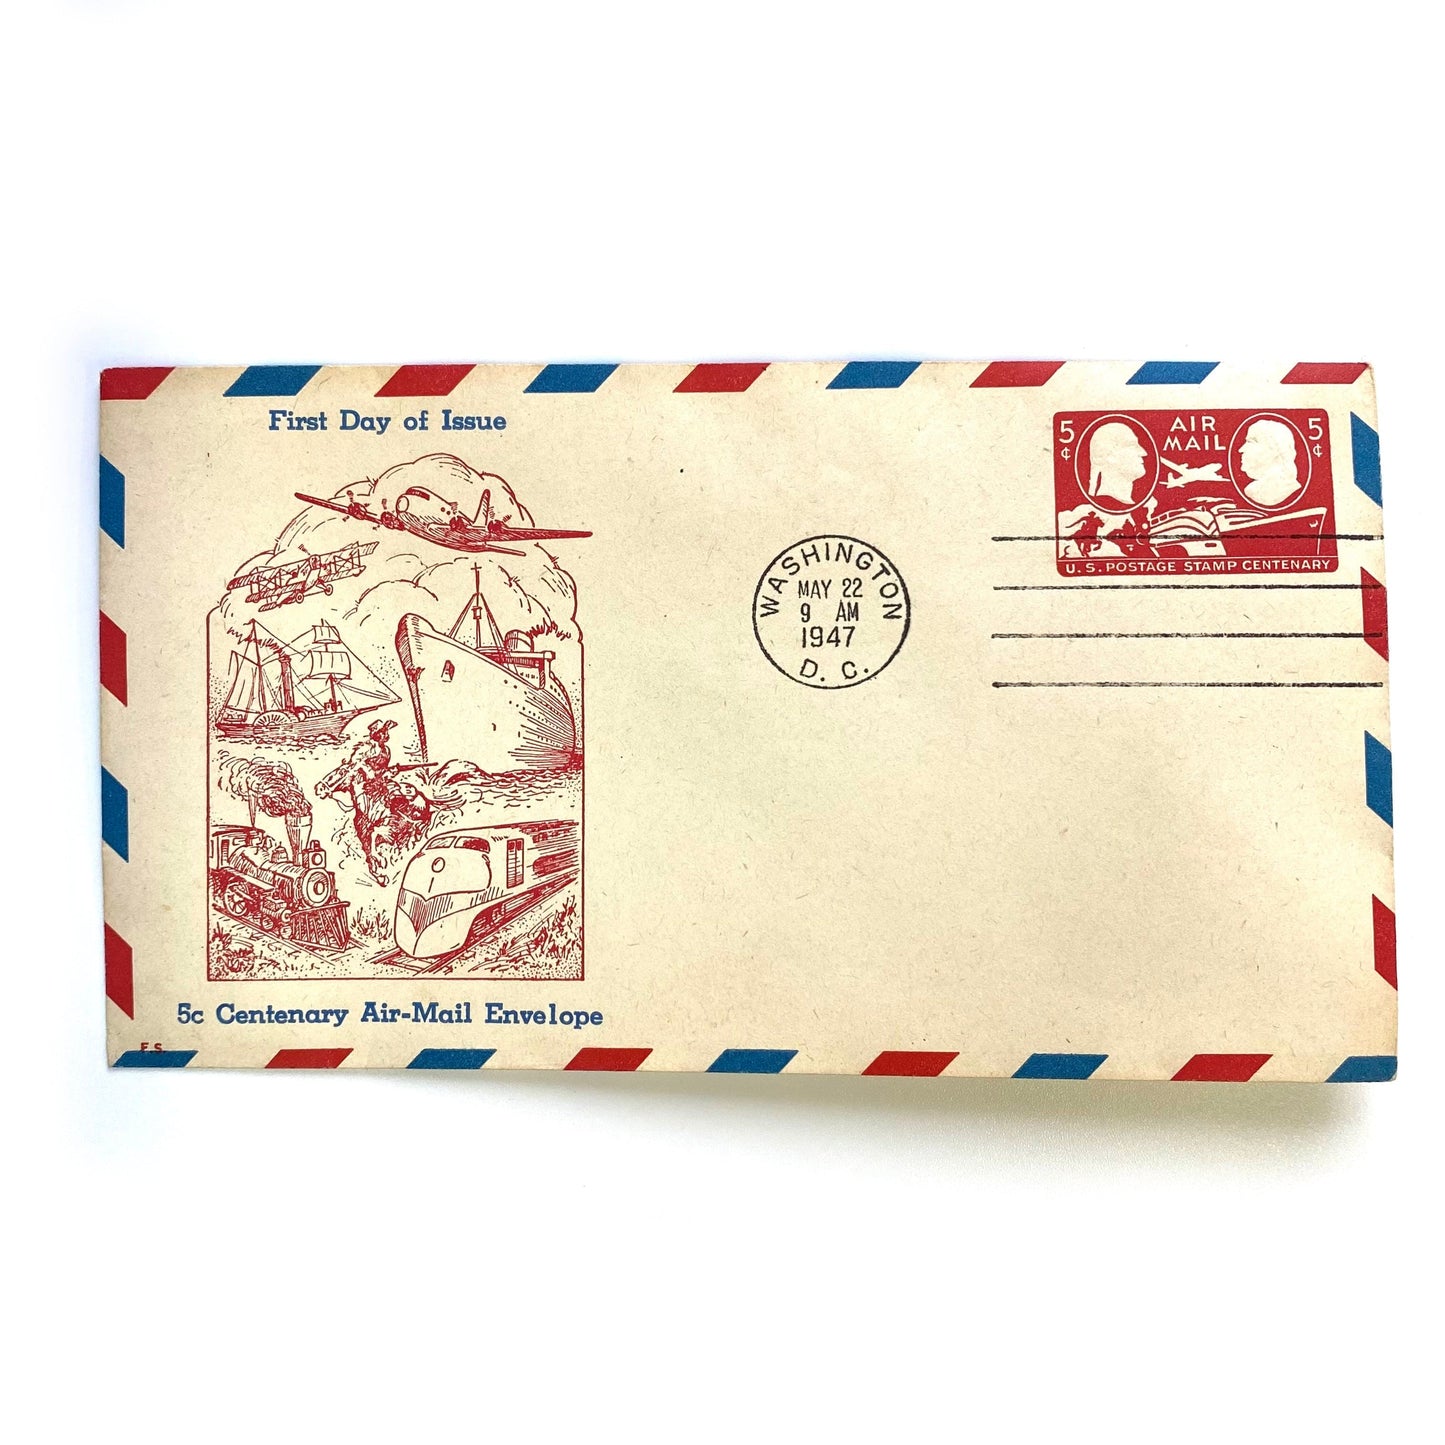 1947 US Postage First Day of Issue Stamp & Envelope  - 5c Centenary Air-Mail